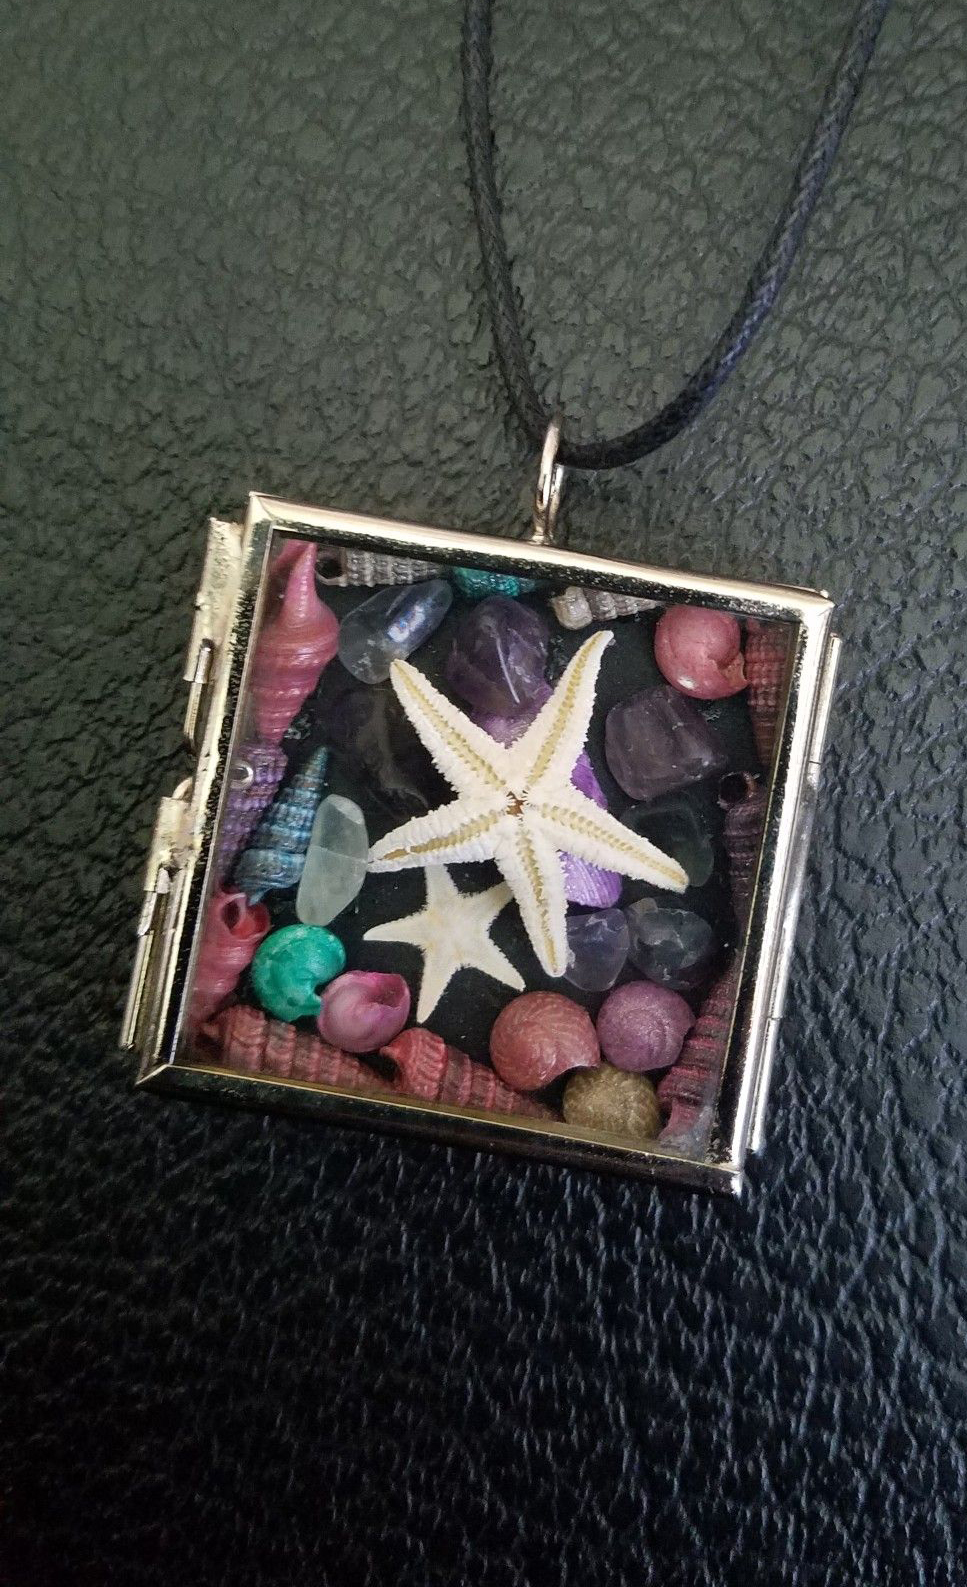 Mini Real Dried Starfish Seashell Amethyst Collage Pendant Necklace 1, art by Sherrie Thai of Shaireproductions.com